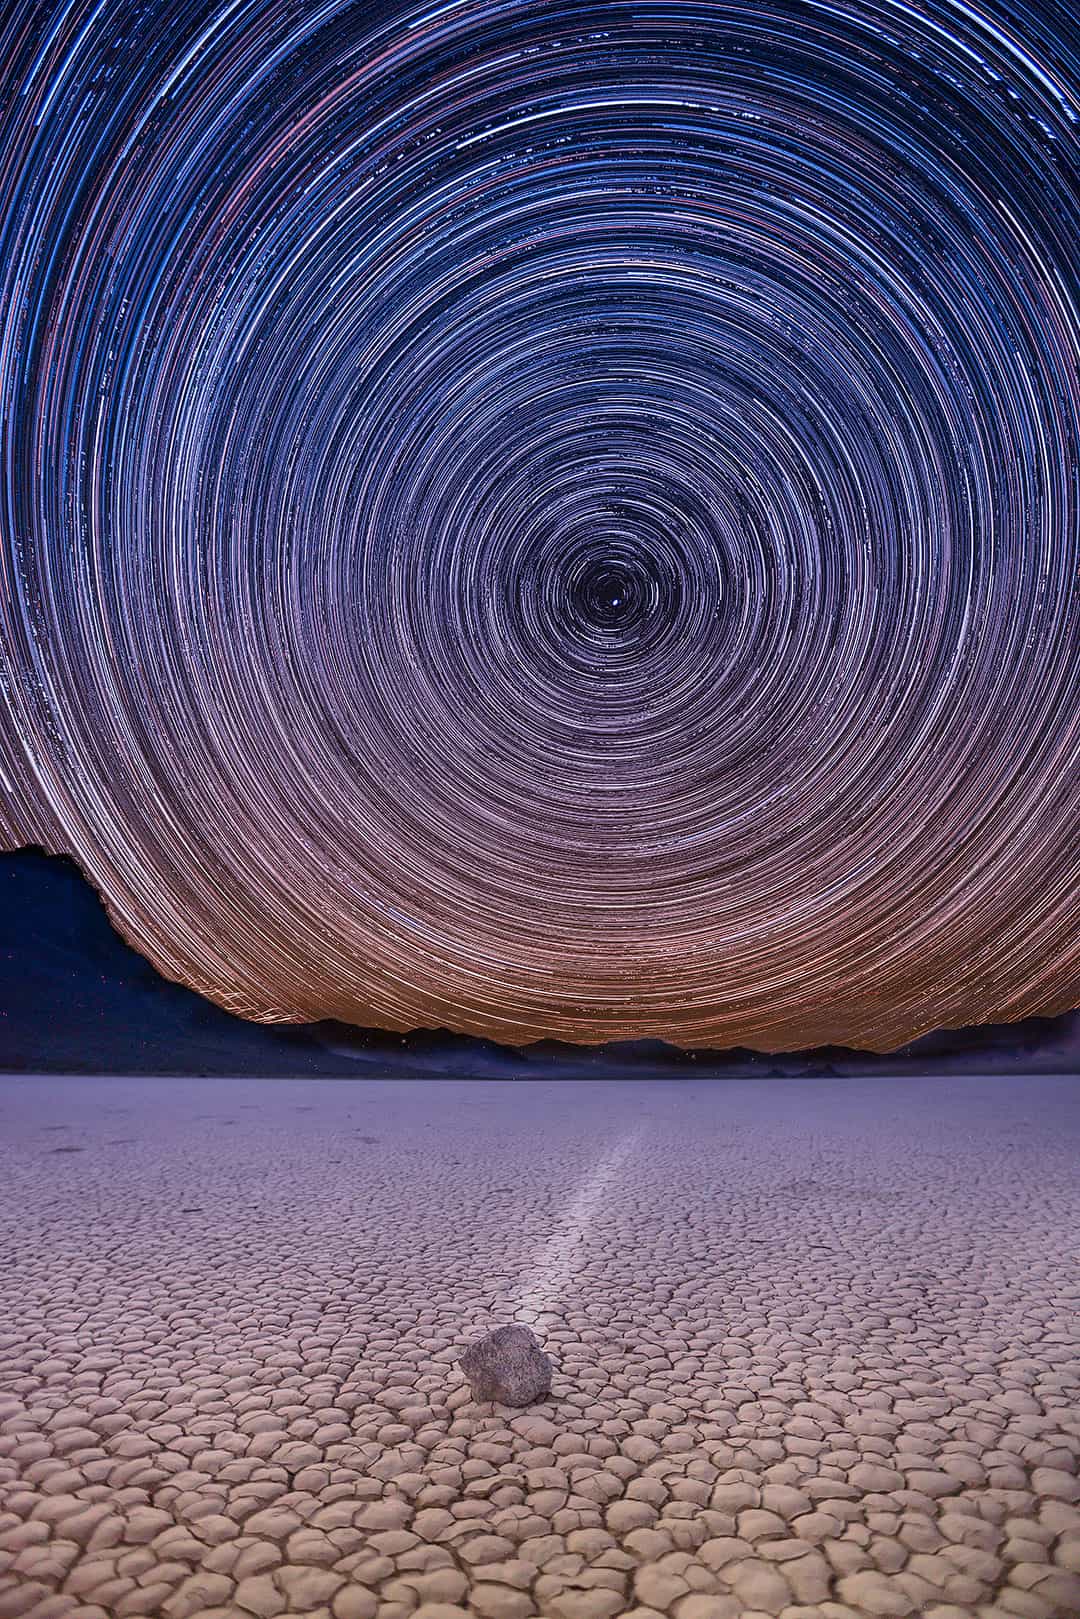 The Racetrack Playa in Death Valley National Park California USA 